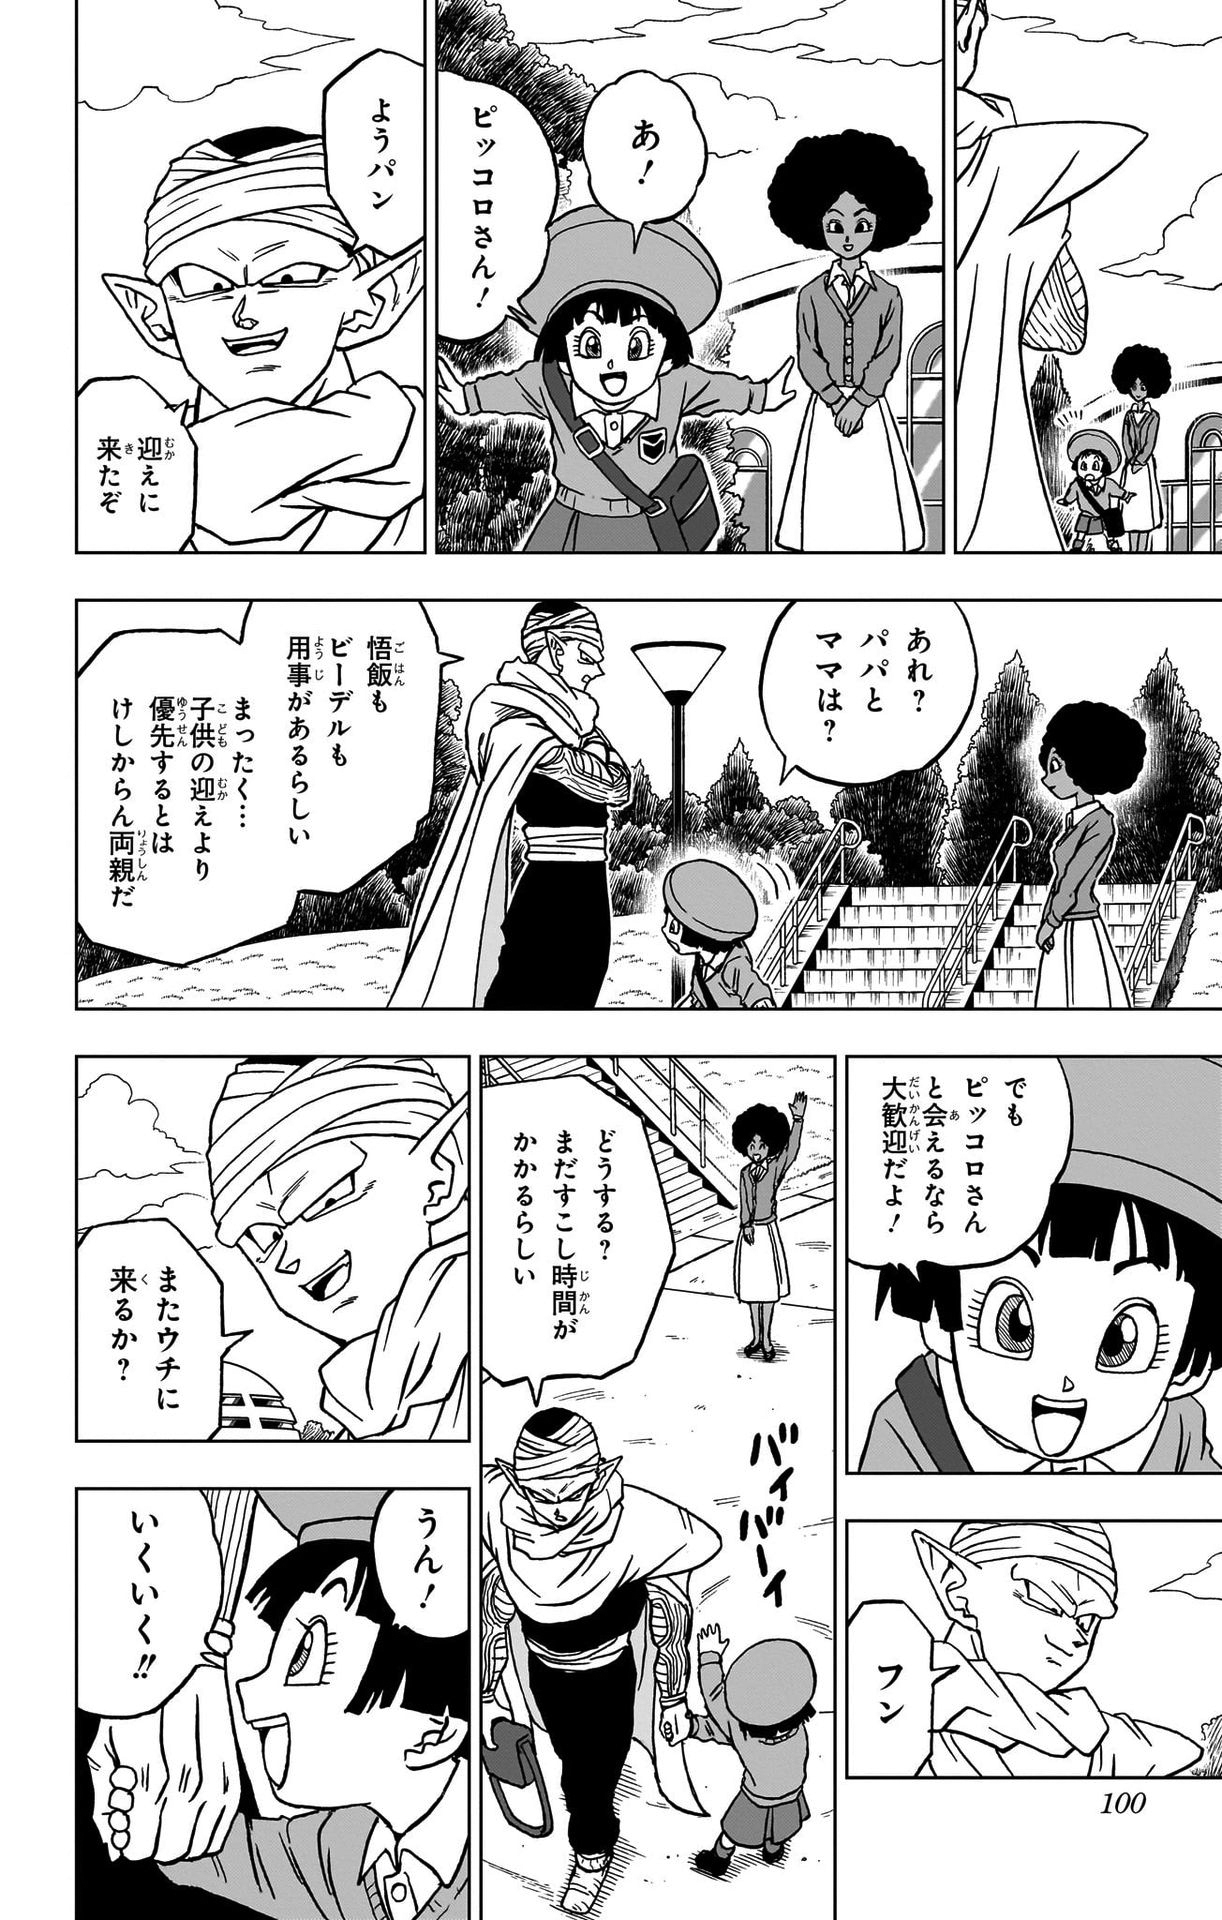 Dragon Ball Super - Chapter 91 - Page 2